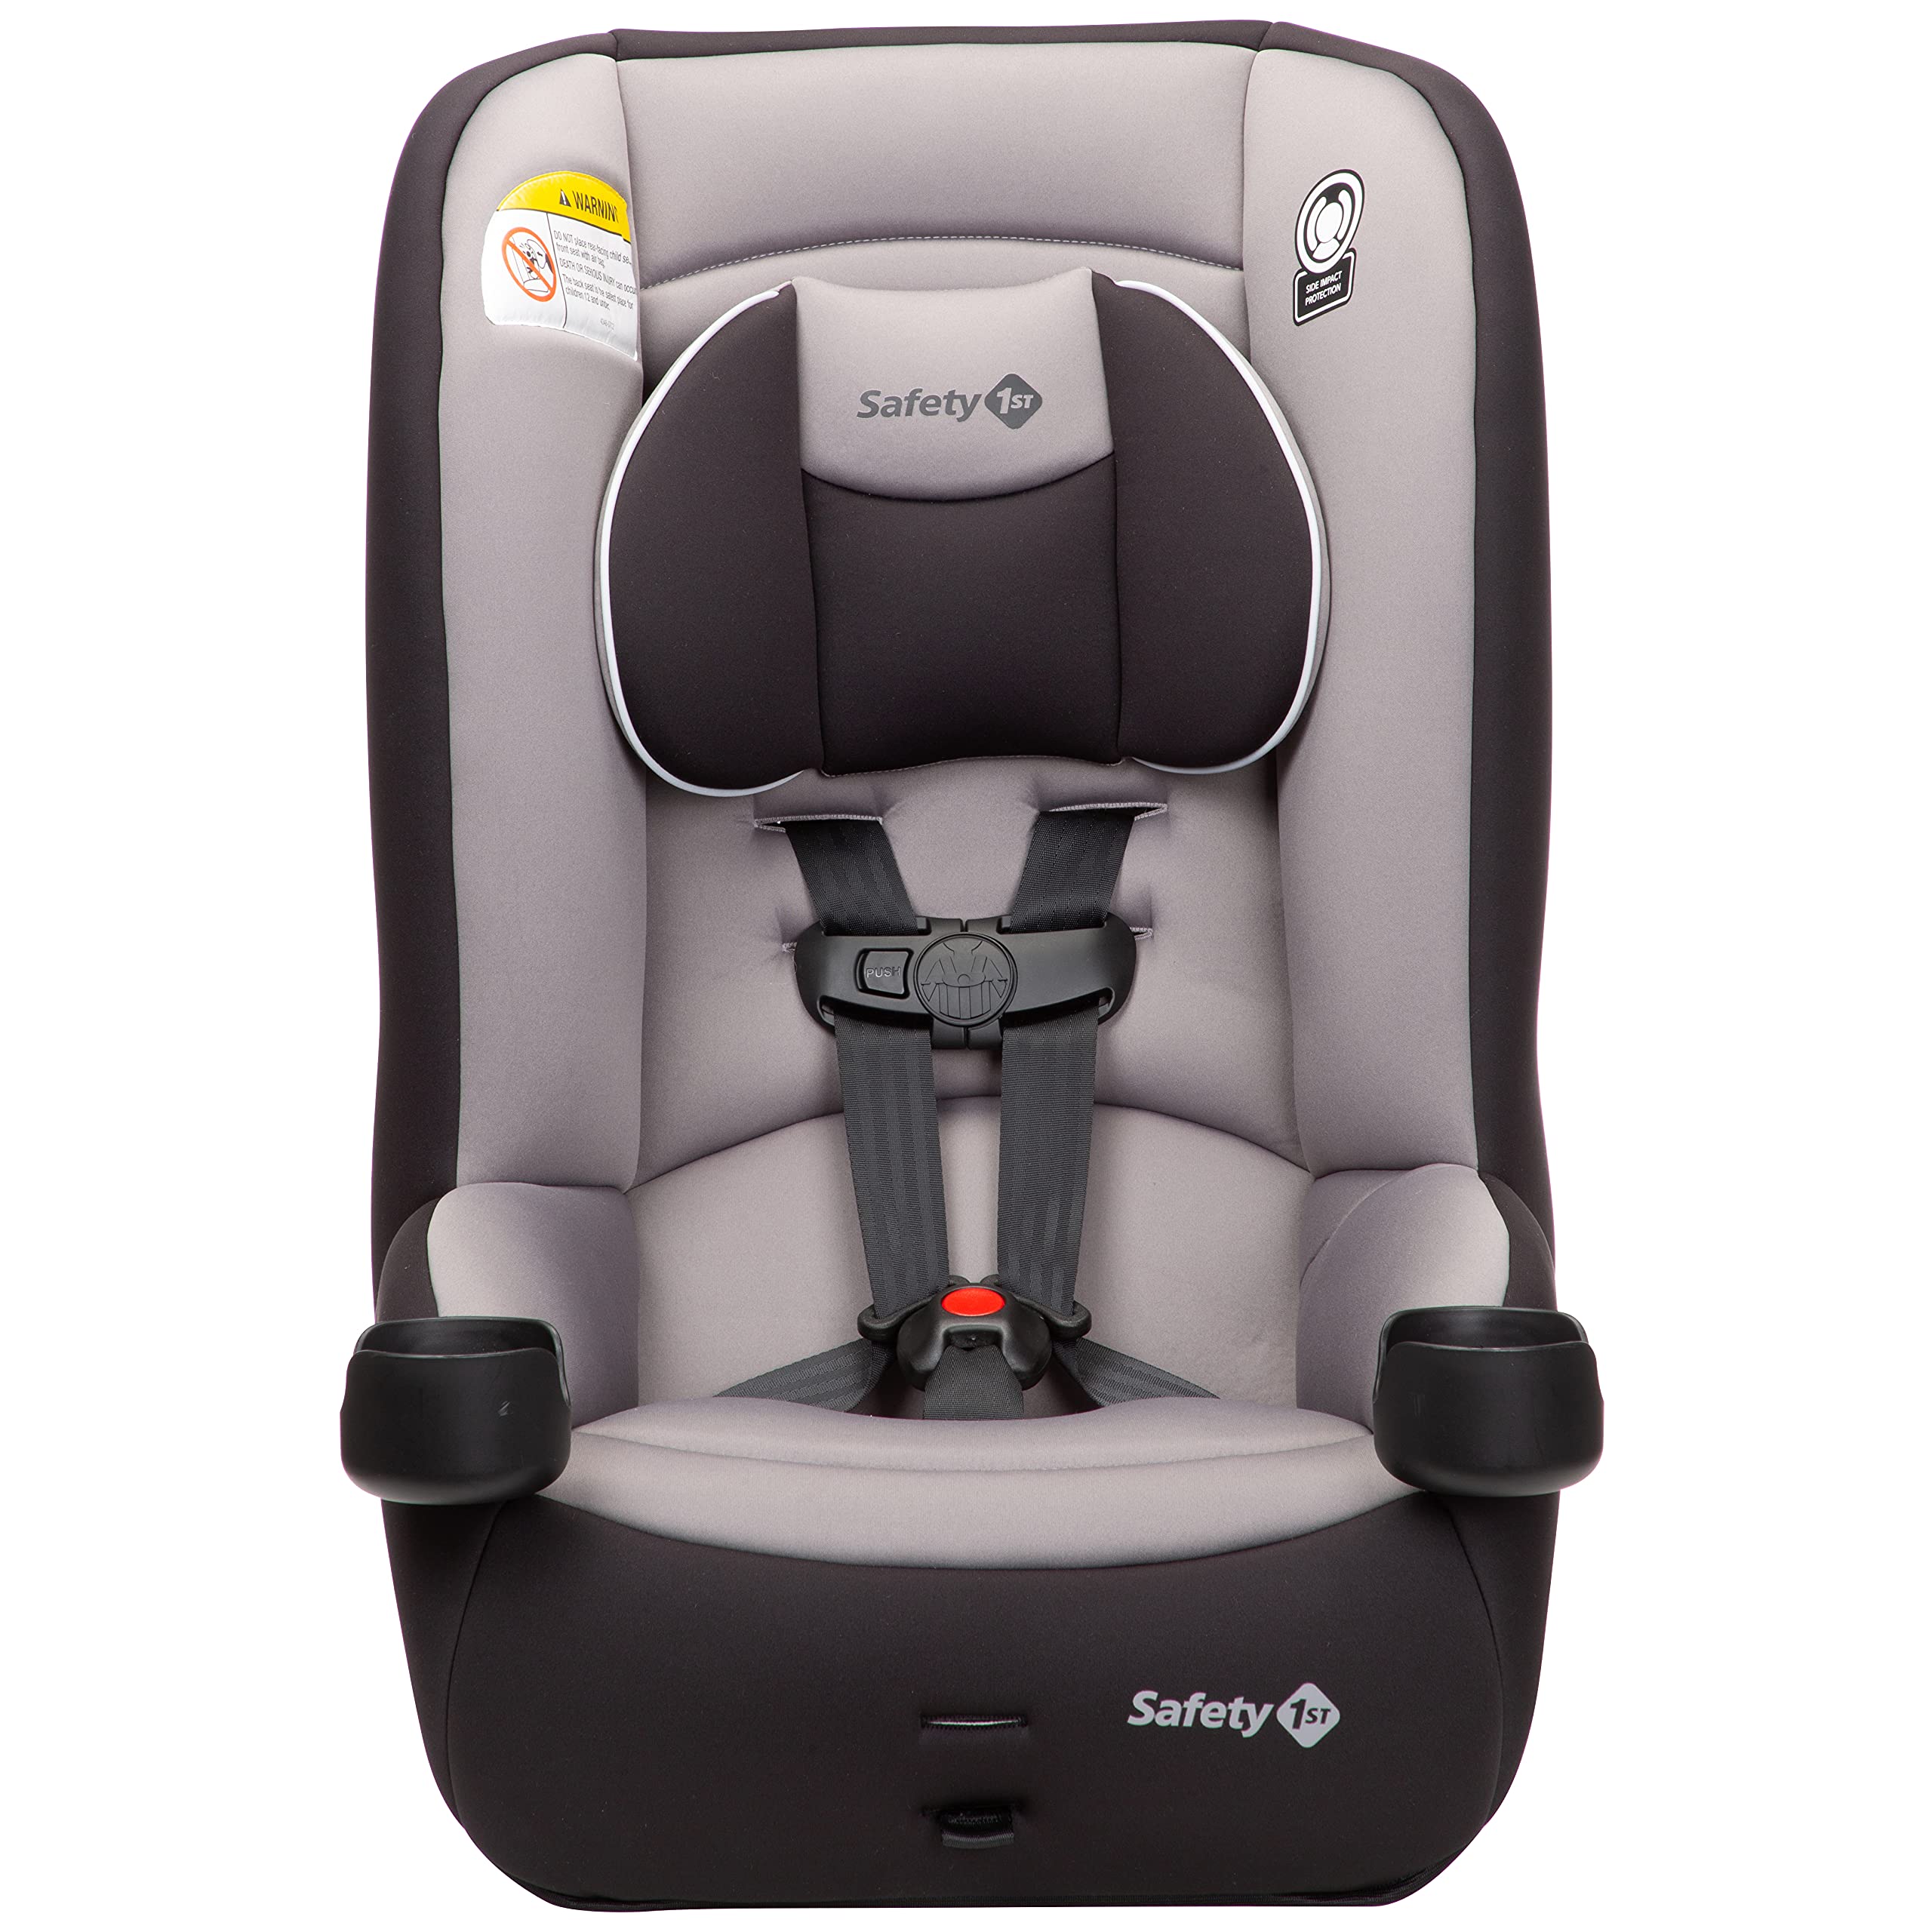 Safety 1st Jive 2-in-1 Convertible Car Seat,Rear-Facing 5-40 pounds and Forward-Facing 22-65 pounds, Black Fox